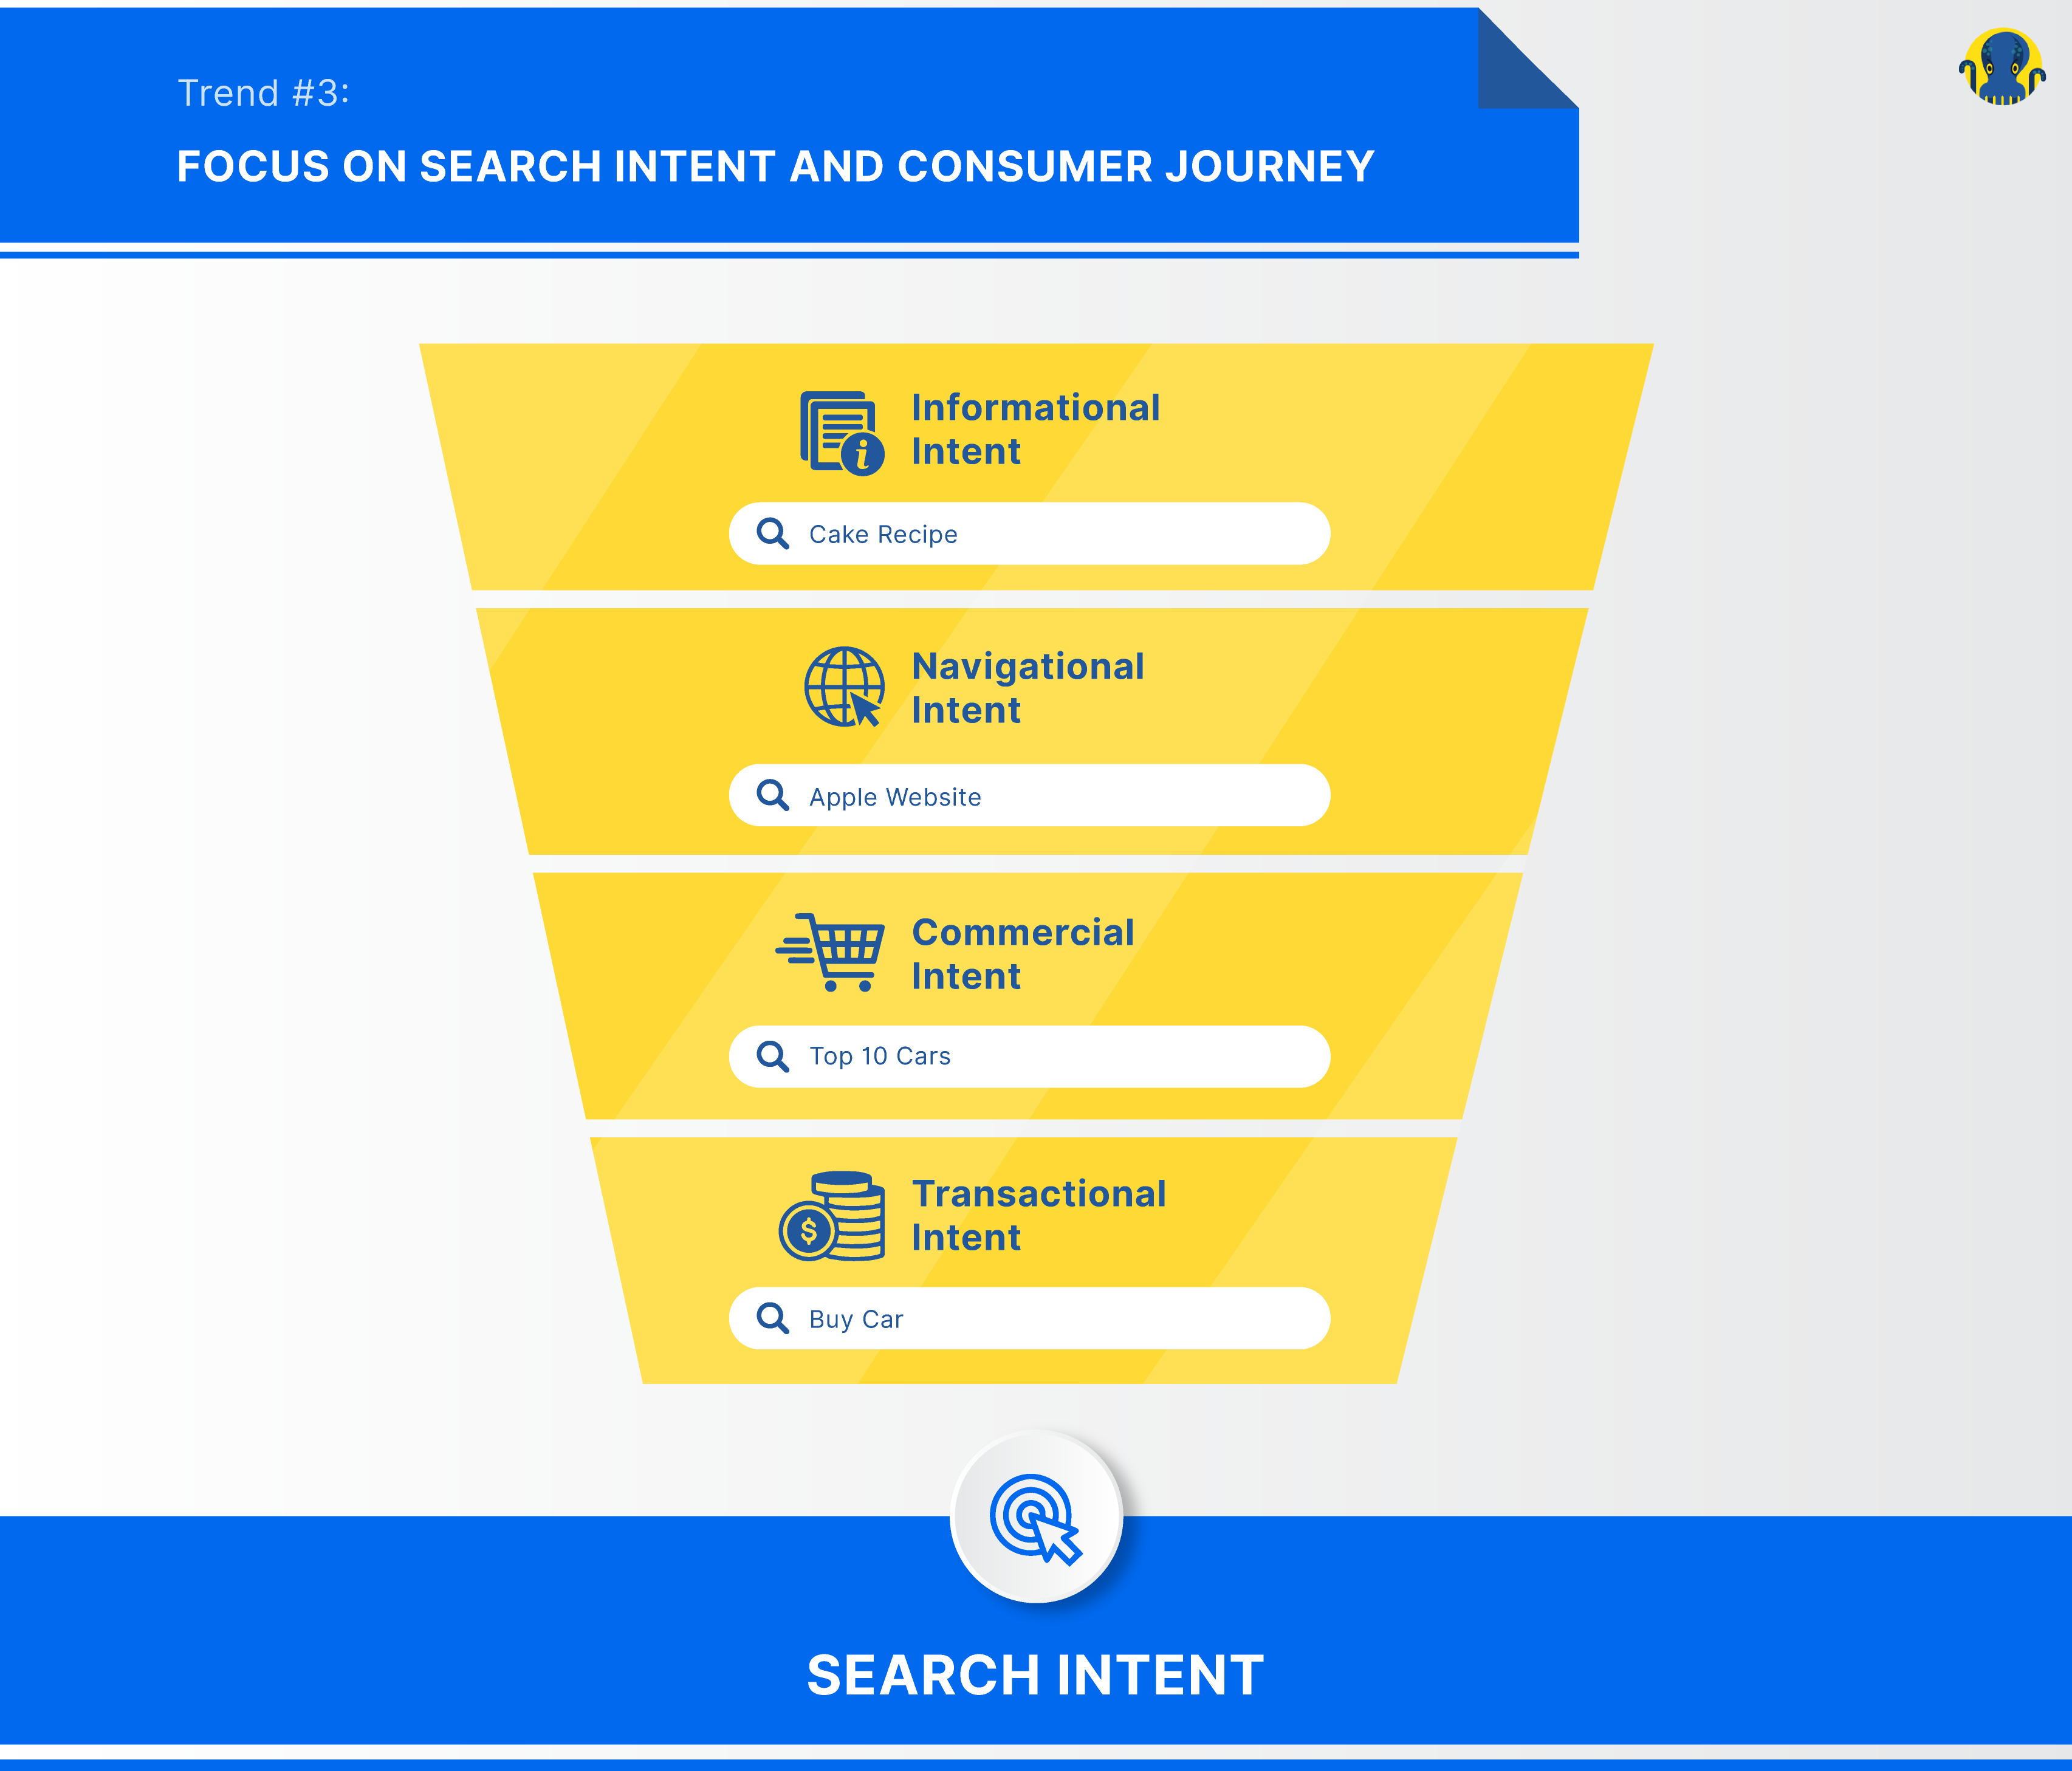 Focus on Search Intent and Consumer Journey